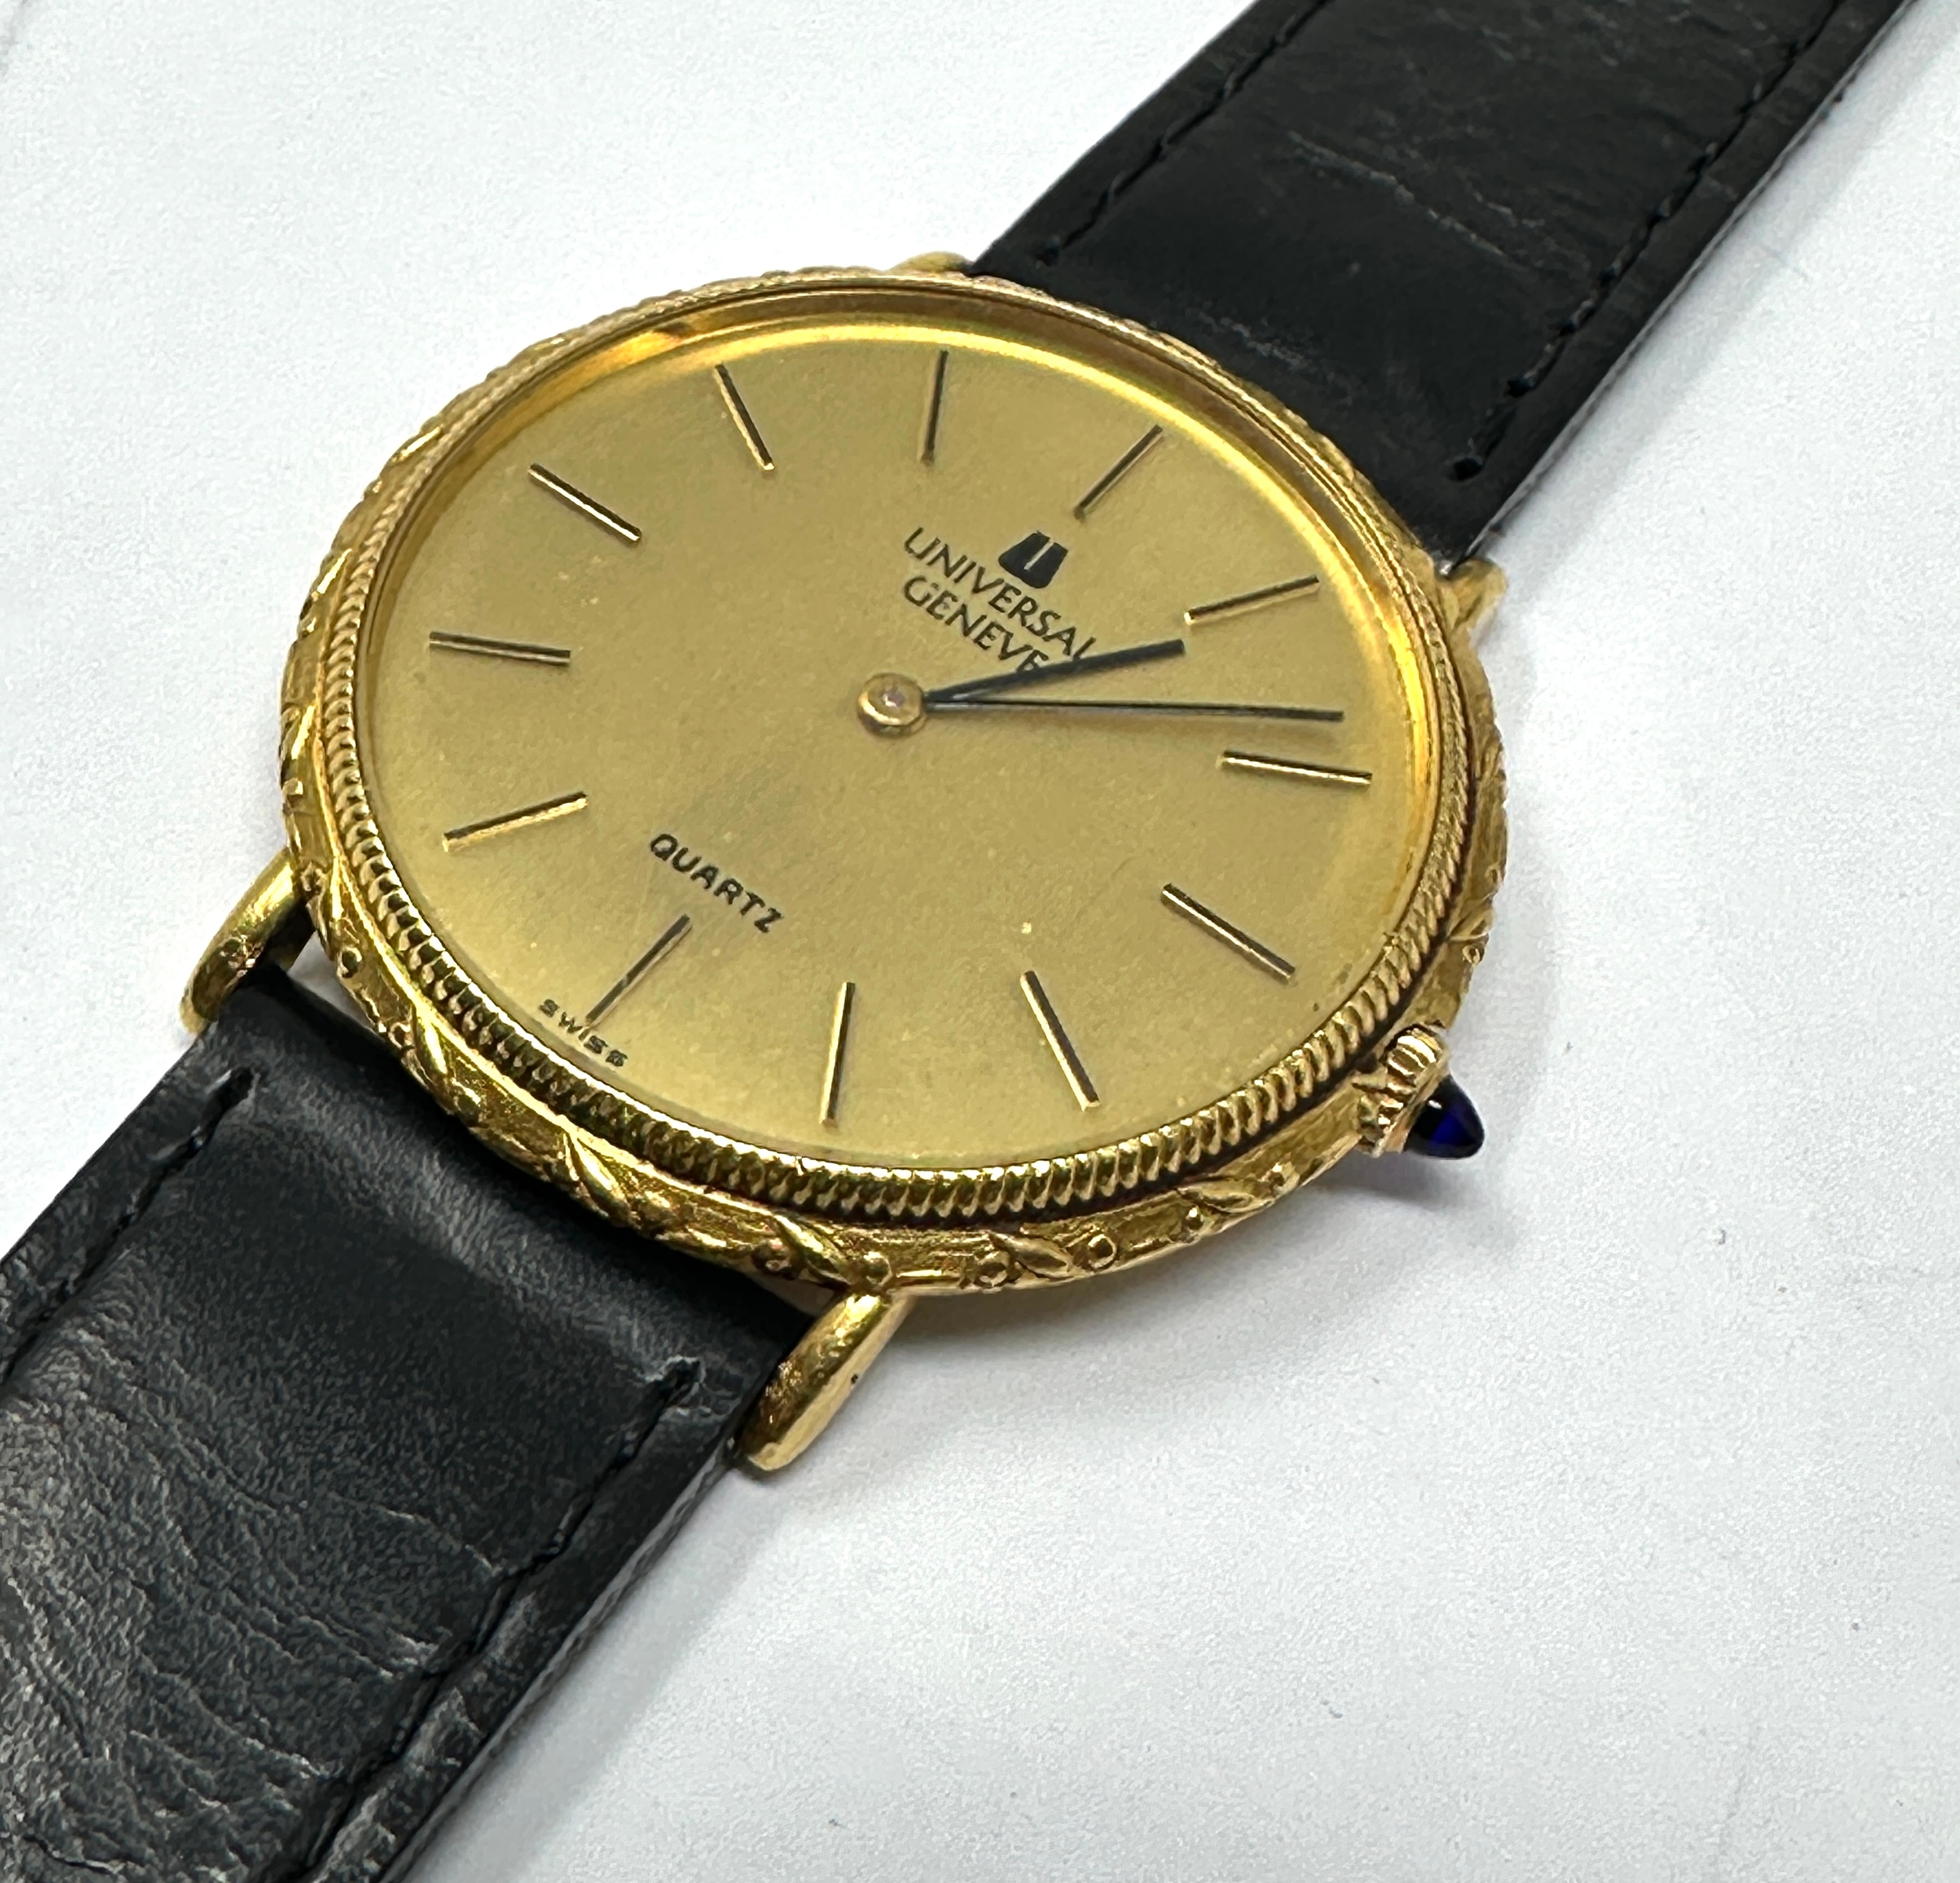 18ct gold universal geneve quartz gents wristwatch the watch is untested will require new battery